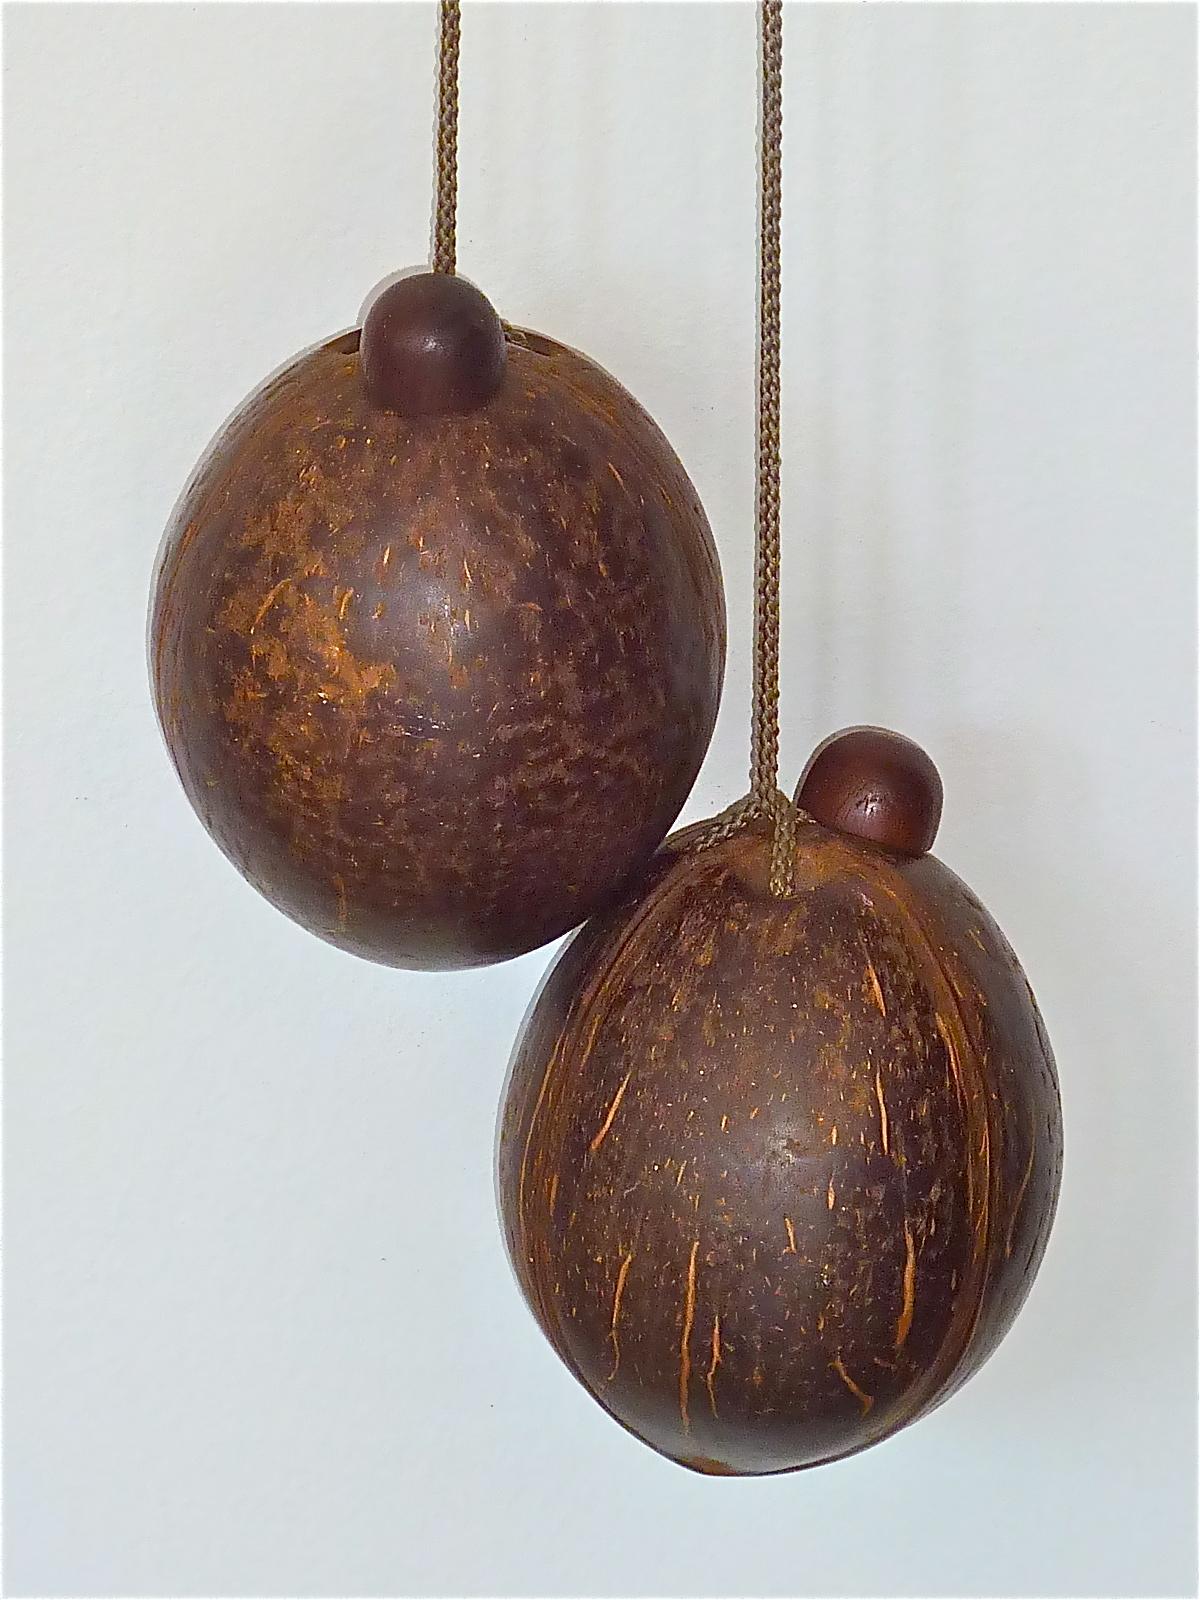 Monumental Teak Wall Lights Lamp by Rupprecht Skrip Coconut Counterweights 1950s For Sale 8